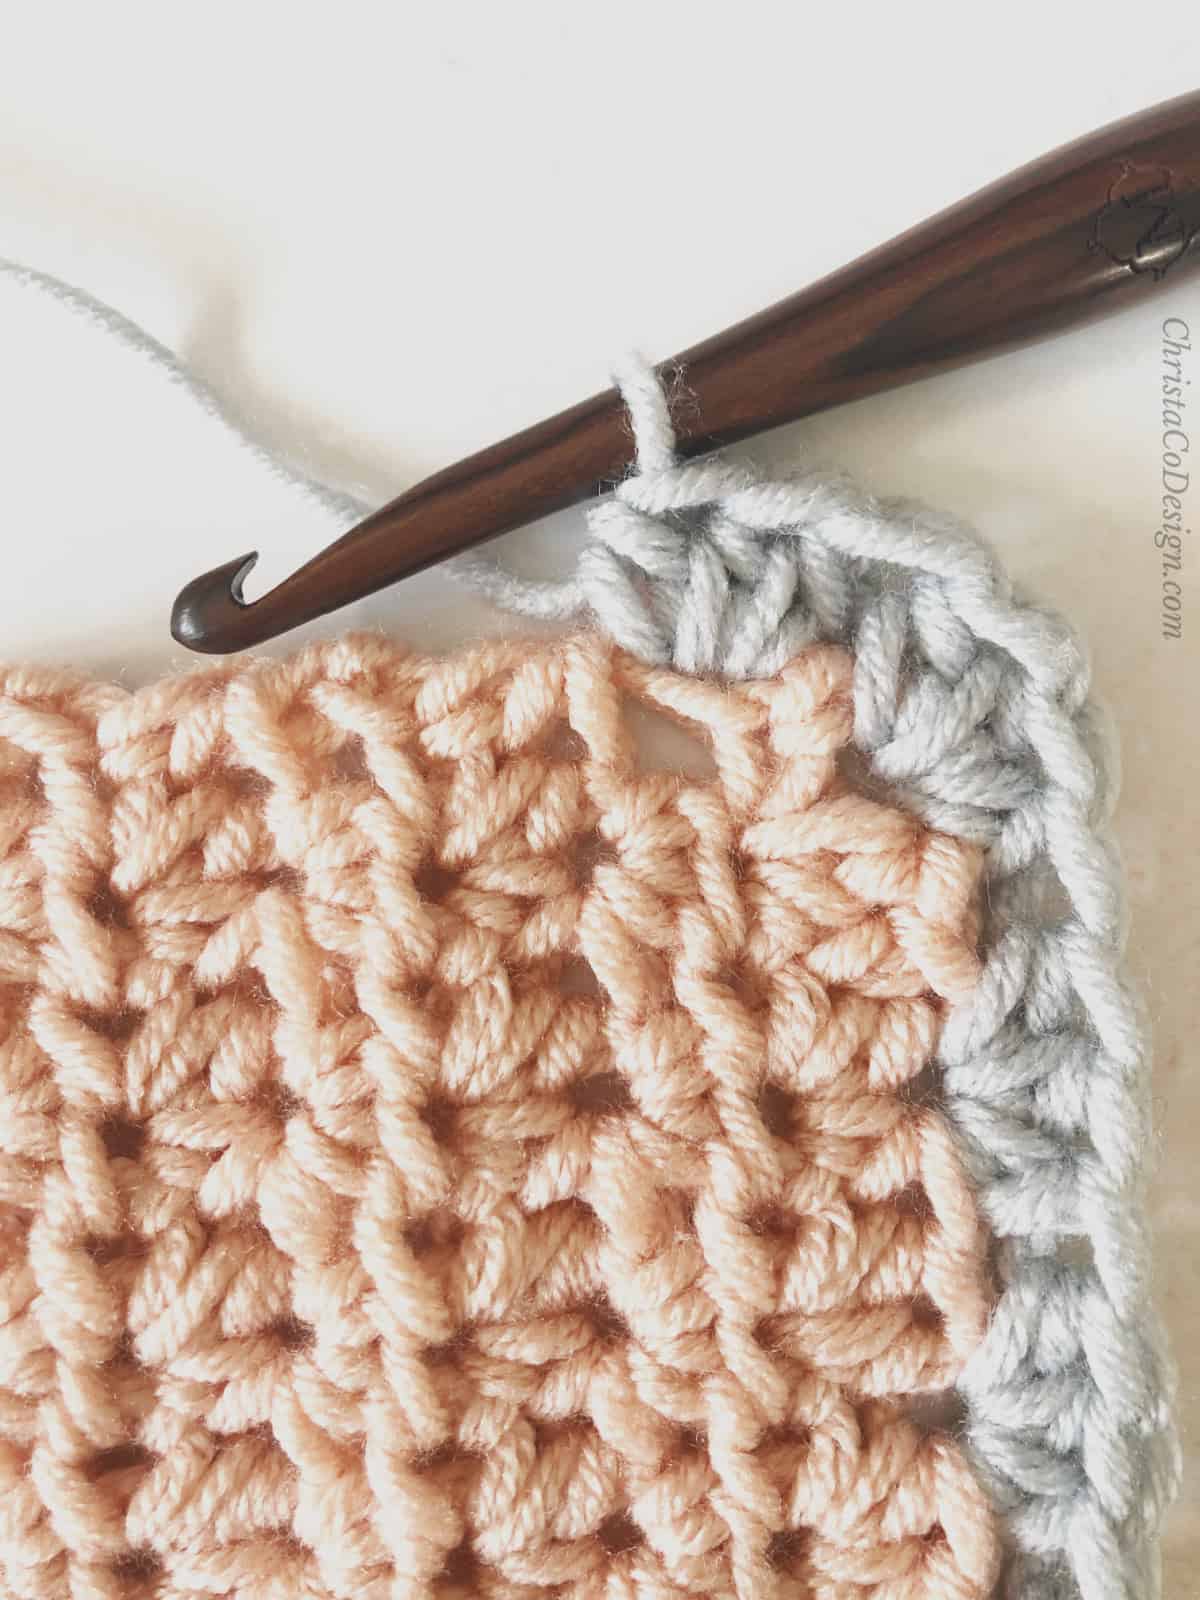 picture of working into sides of hdc rows for crochet border